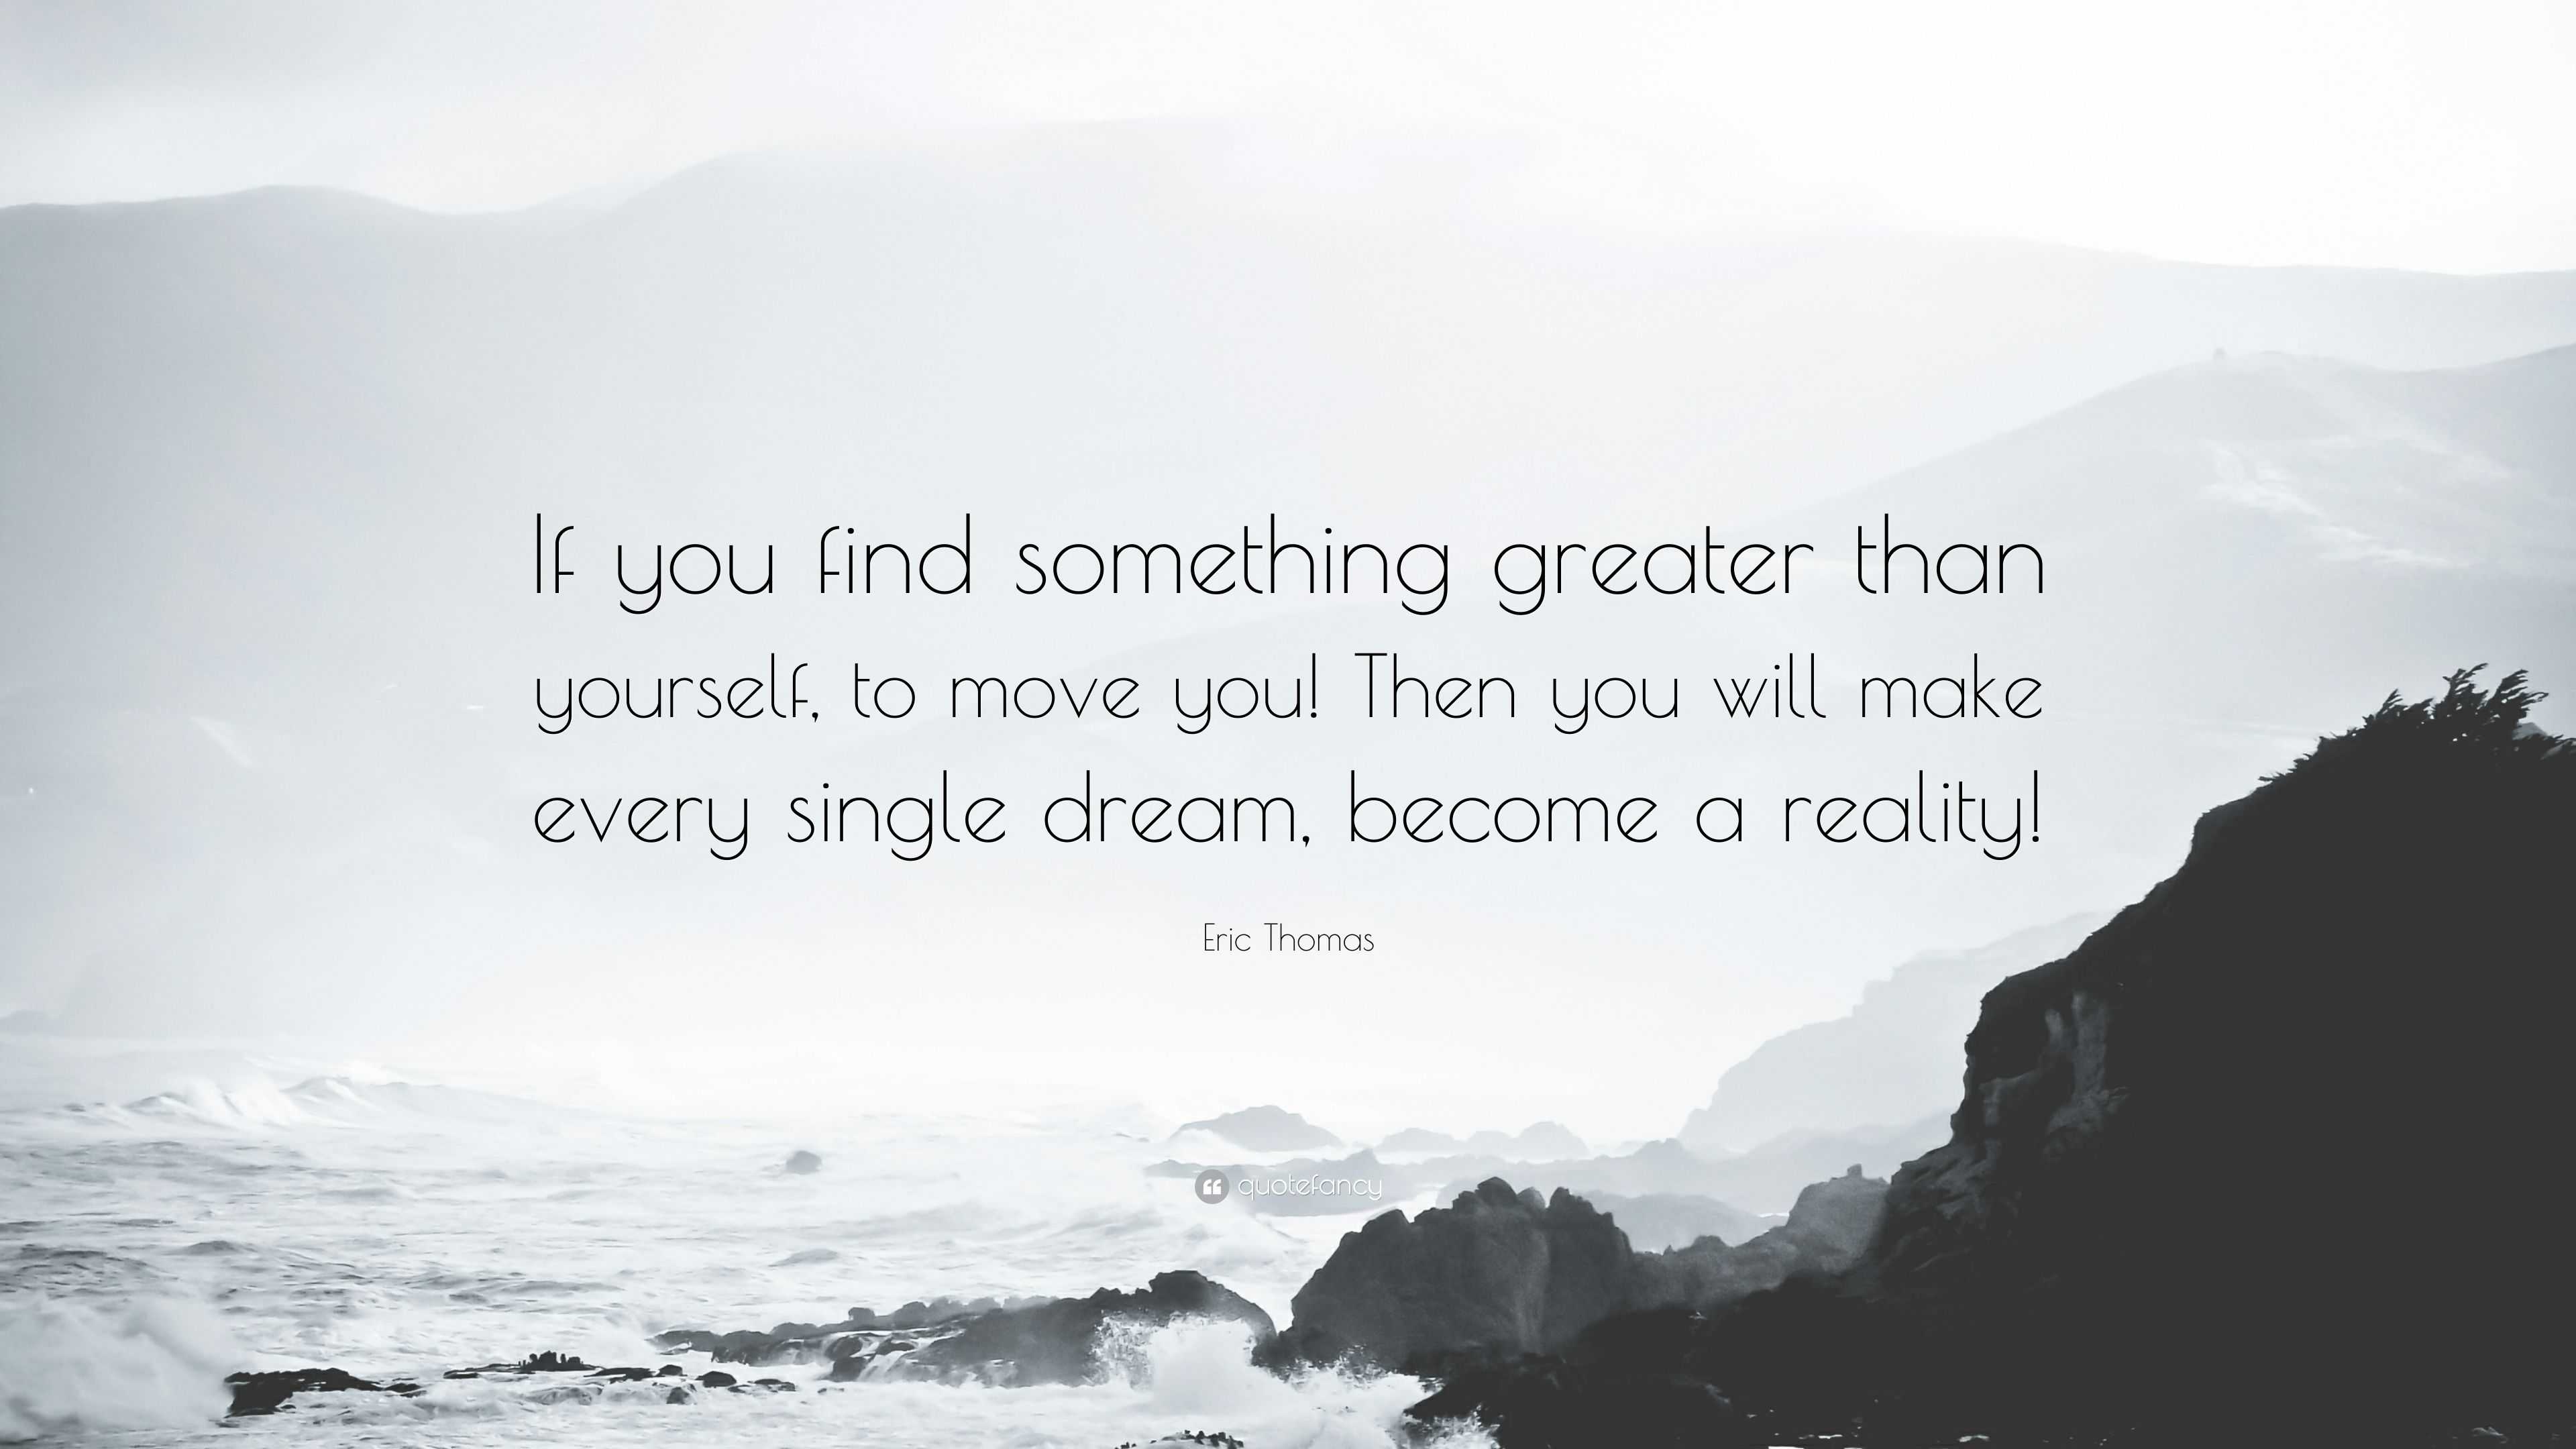 Eric Thomas Quote: “If you find something greater than yourself, to ...